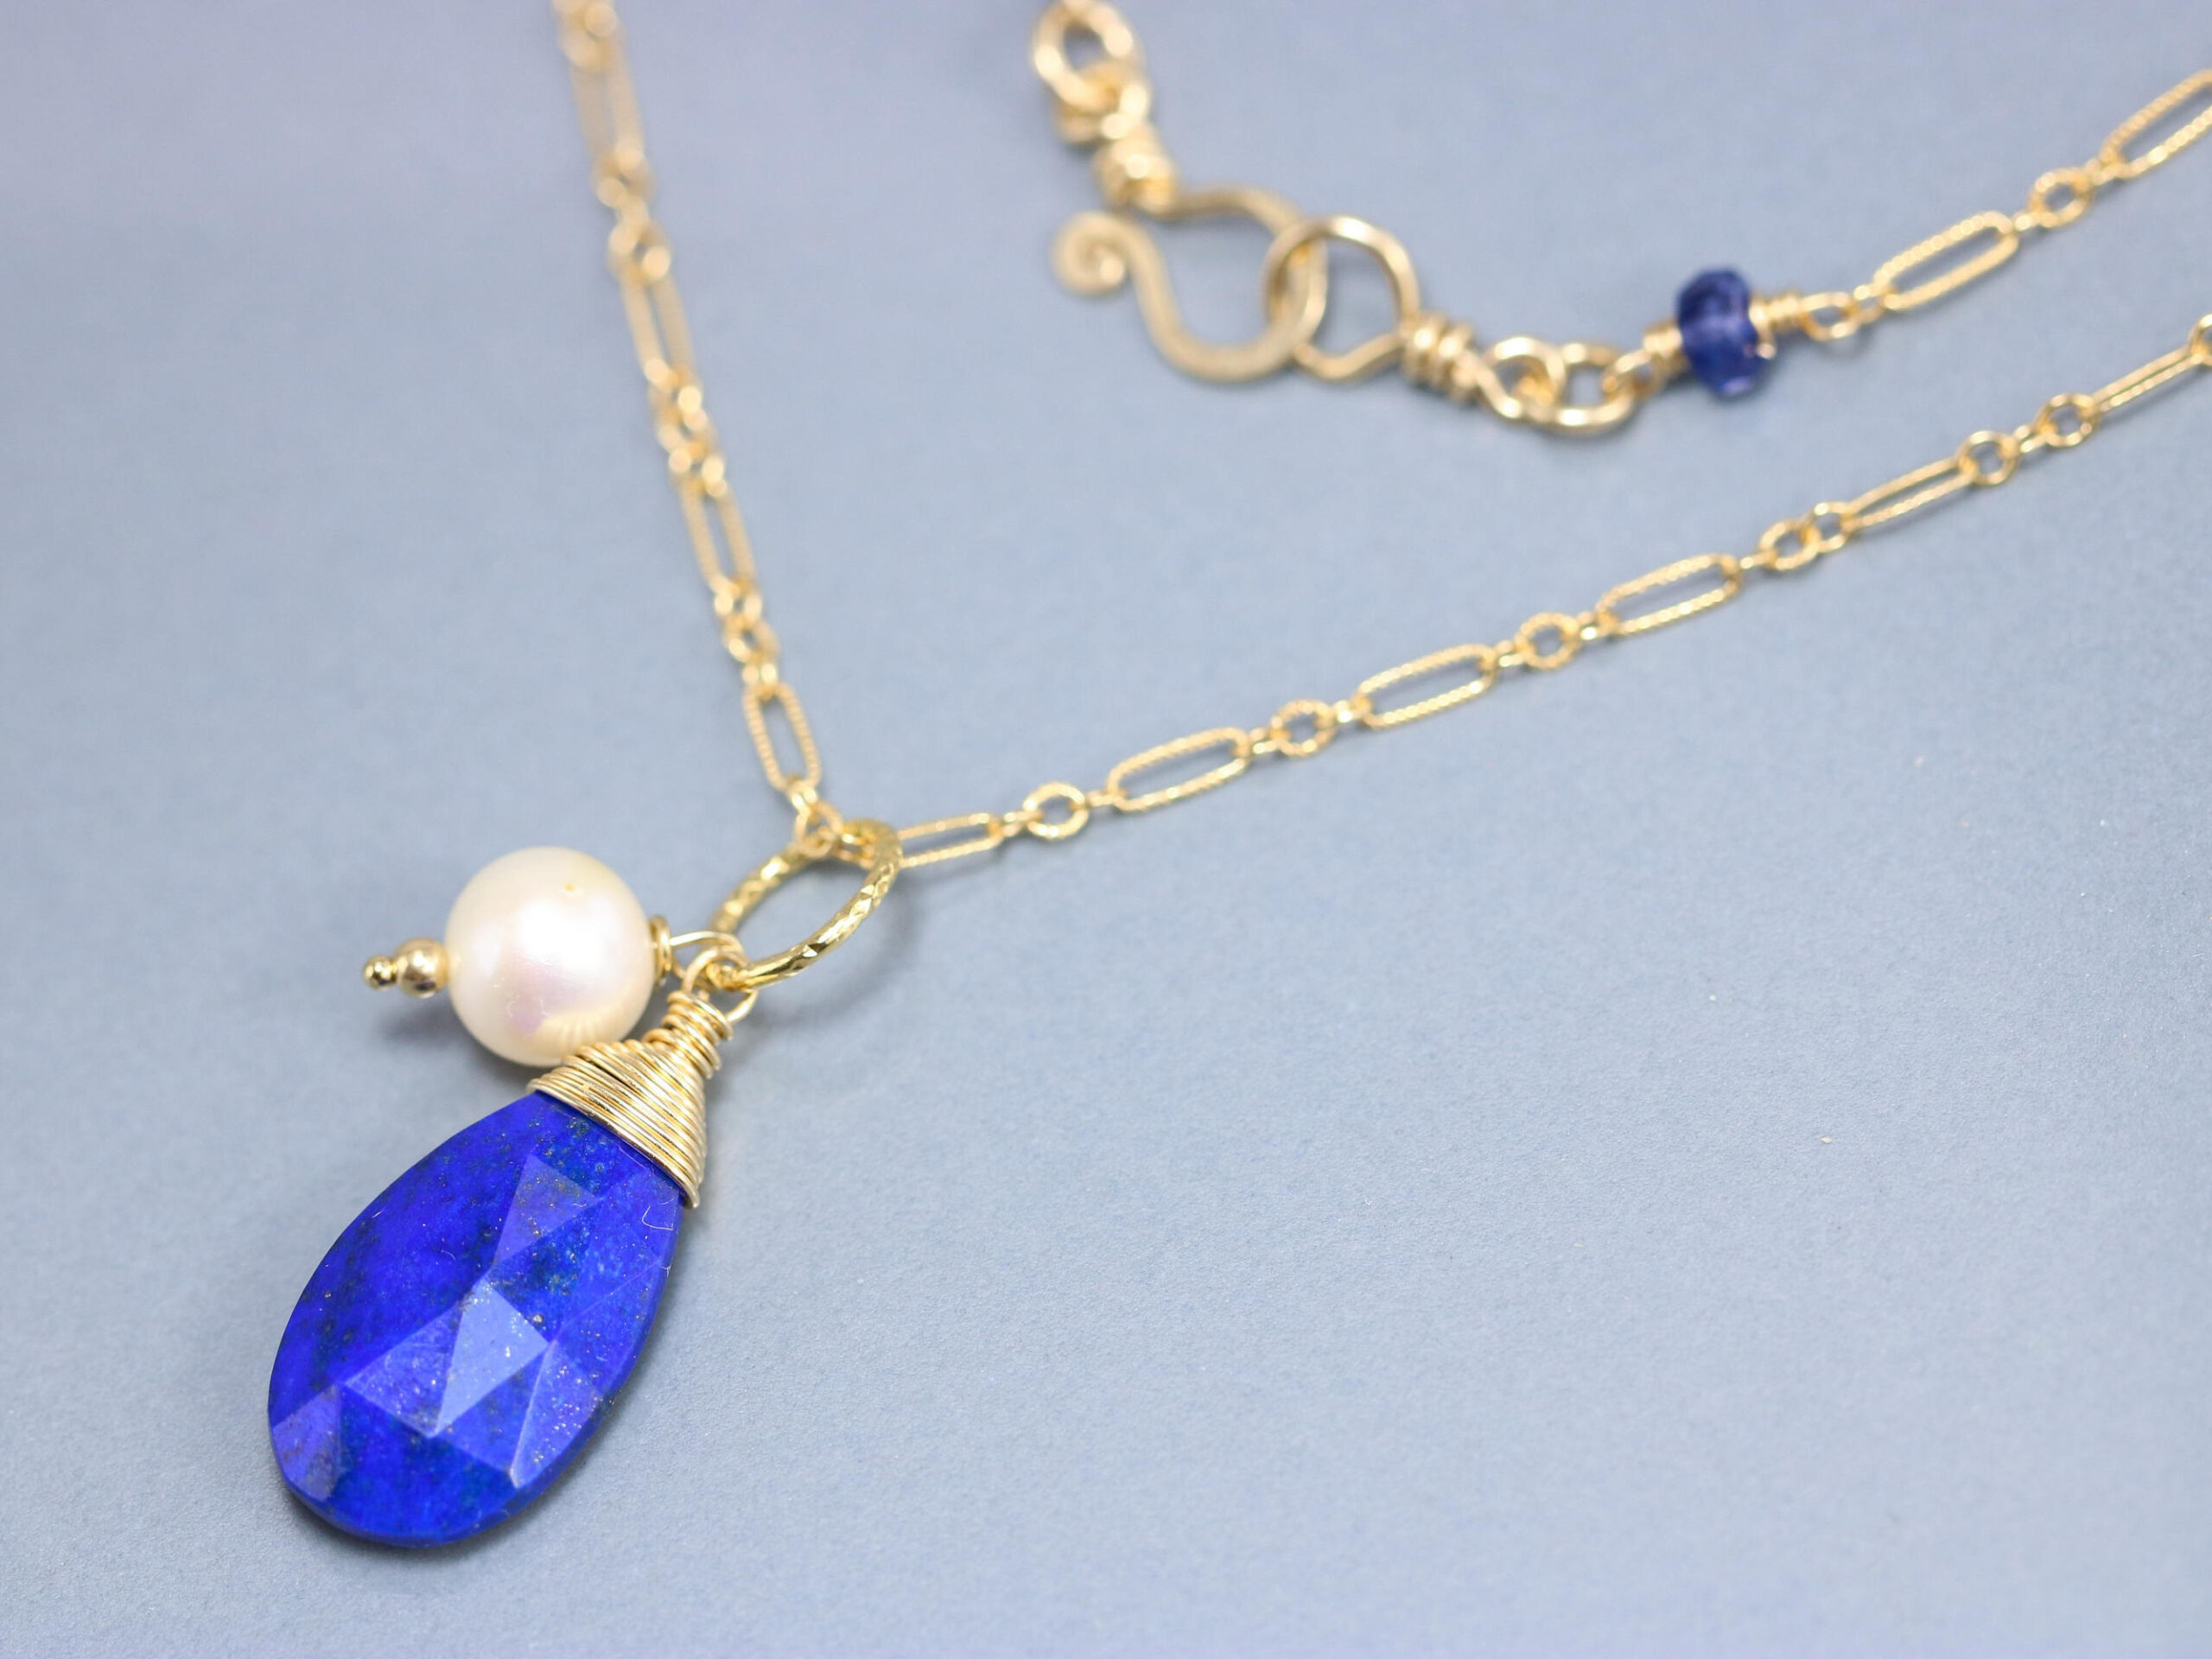 Blue Lapis Lazuli Drop Wire Wrapped Pendant with White Pearl in Gold Filled